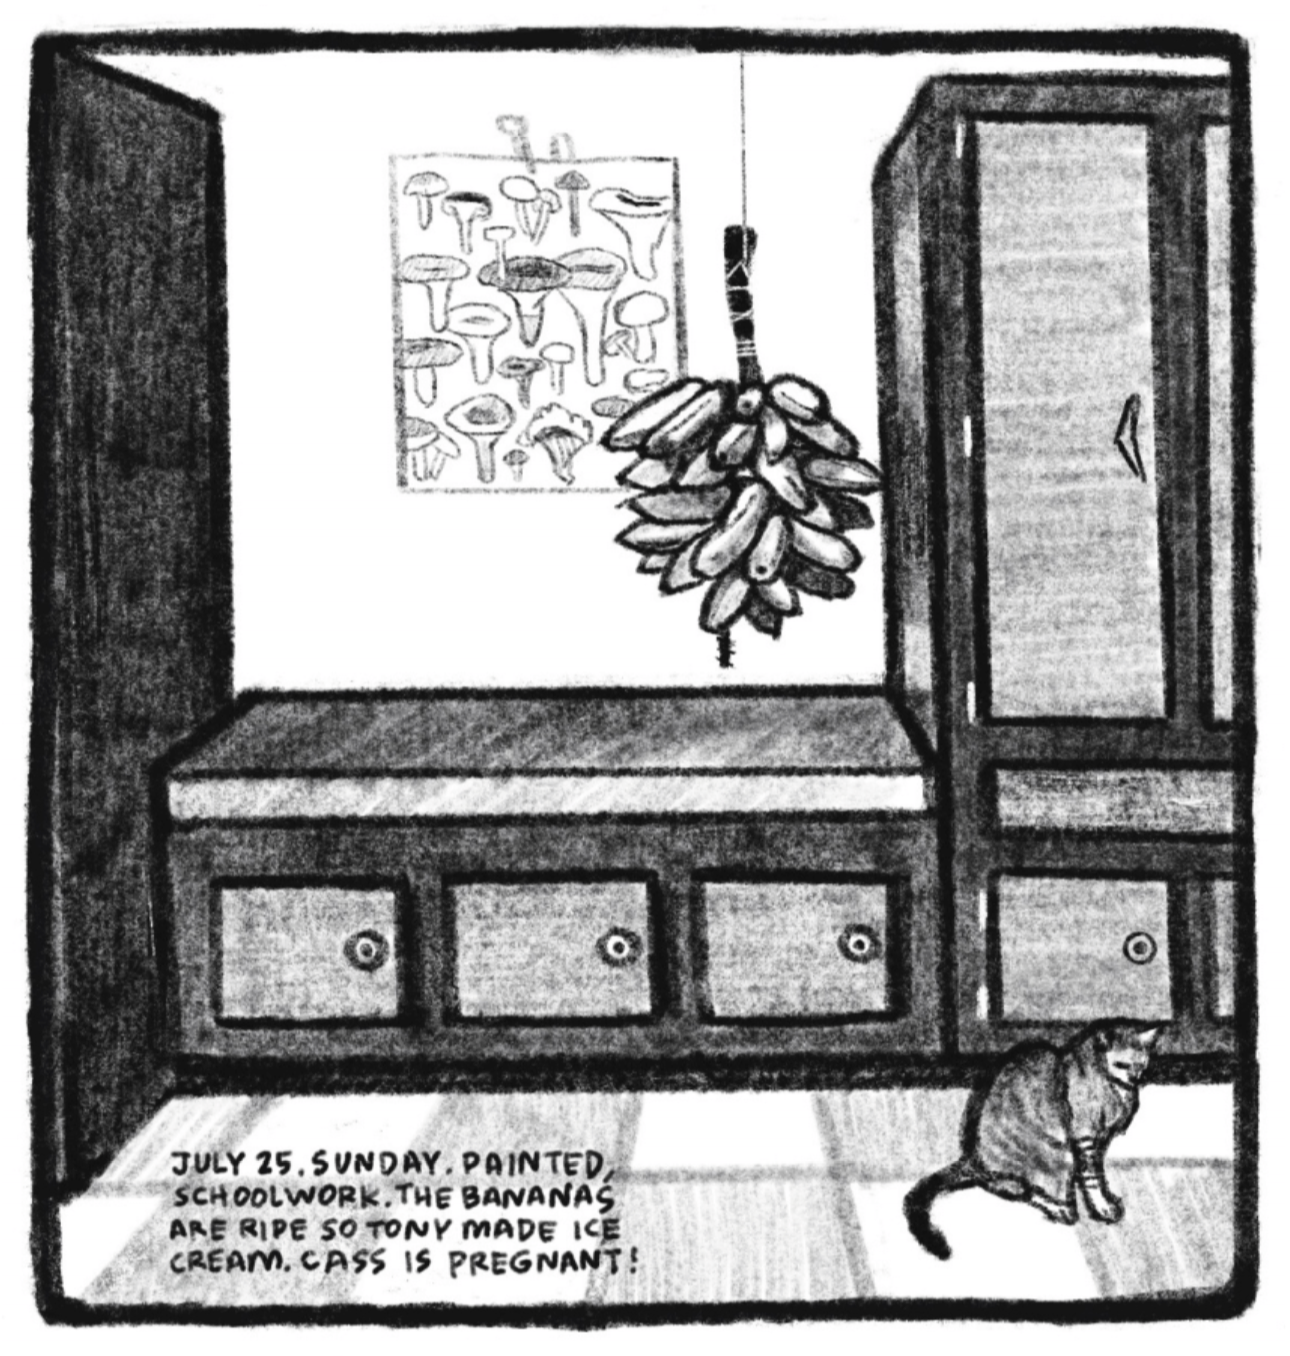 5. A view of inside Kimâ€™s house: the cushioned bench with built-in drawers is sandwiched by two large cabinet chests/wardrobes. The mushroom poster is on the wall. The rack of orinoco bananas hangs on a string from the ceiling. Kimâ€™s cat sits on the floor in front of the furniture. â€œJuly 25. Sunday. Painted, schoolwork. The bananas are ripe so Tony made ice cream. Cass is pregnant!â€